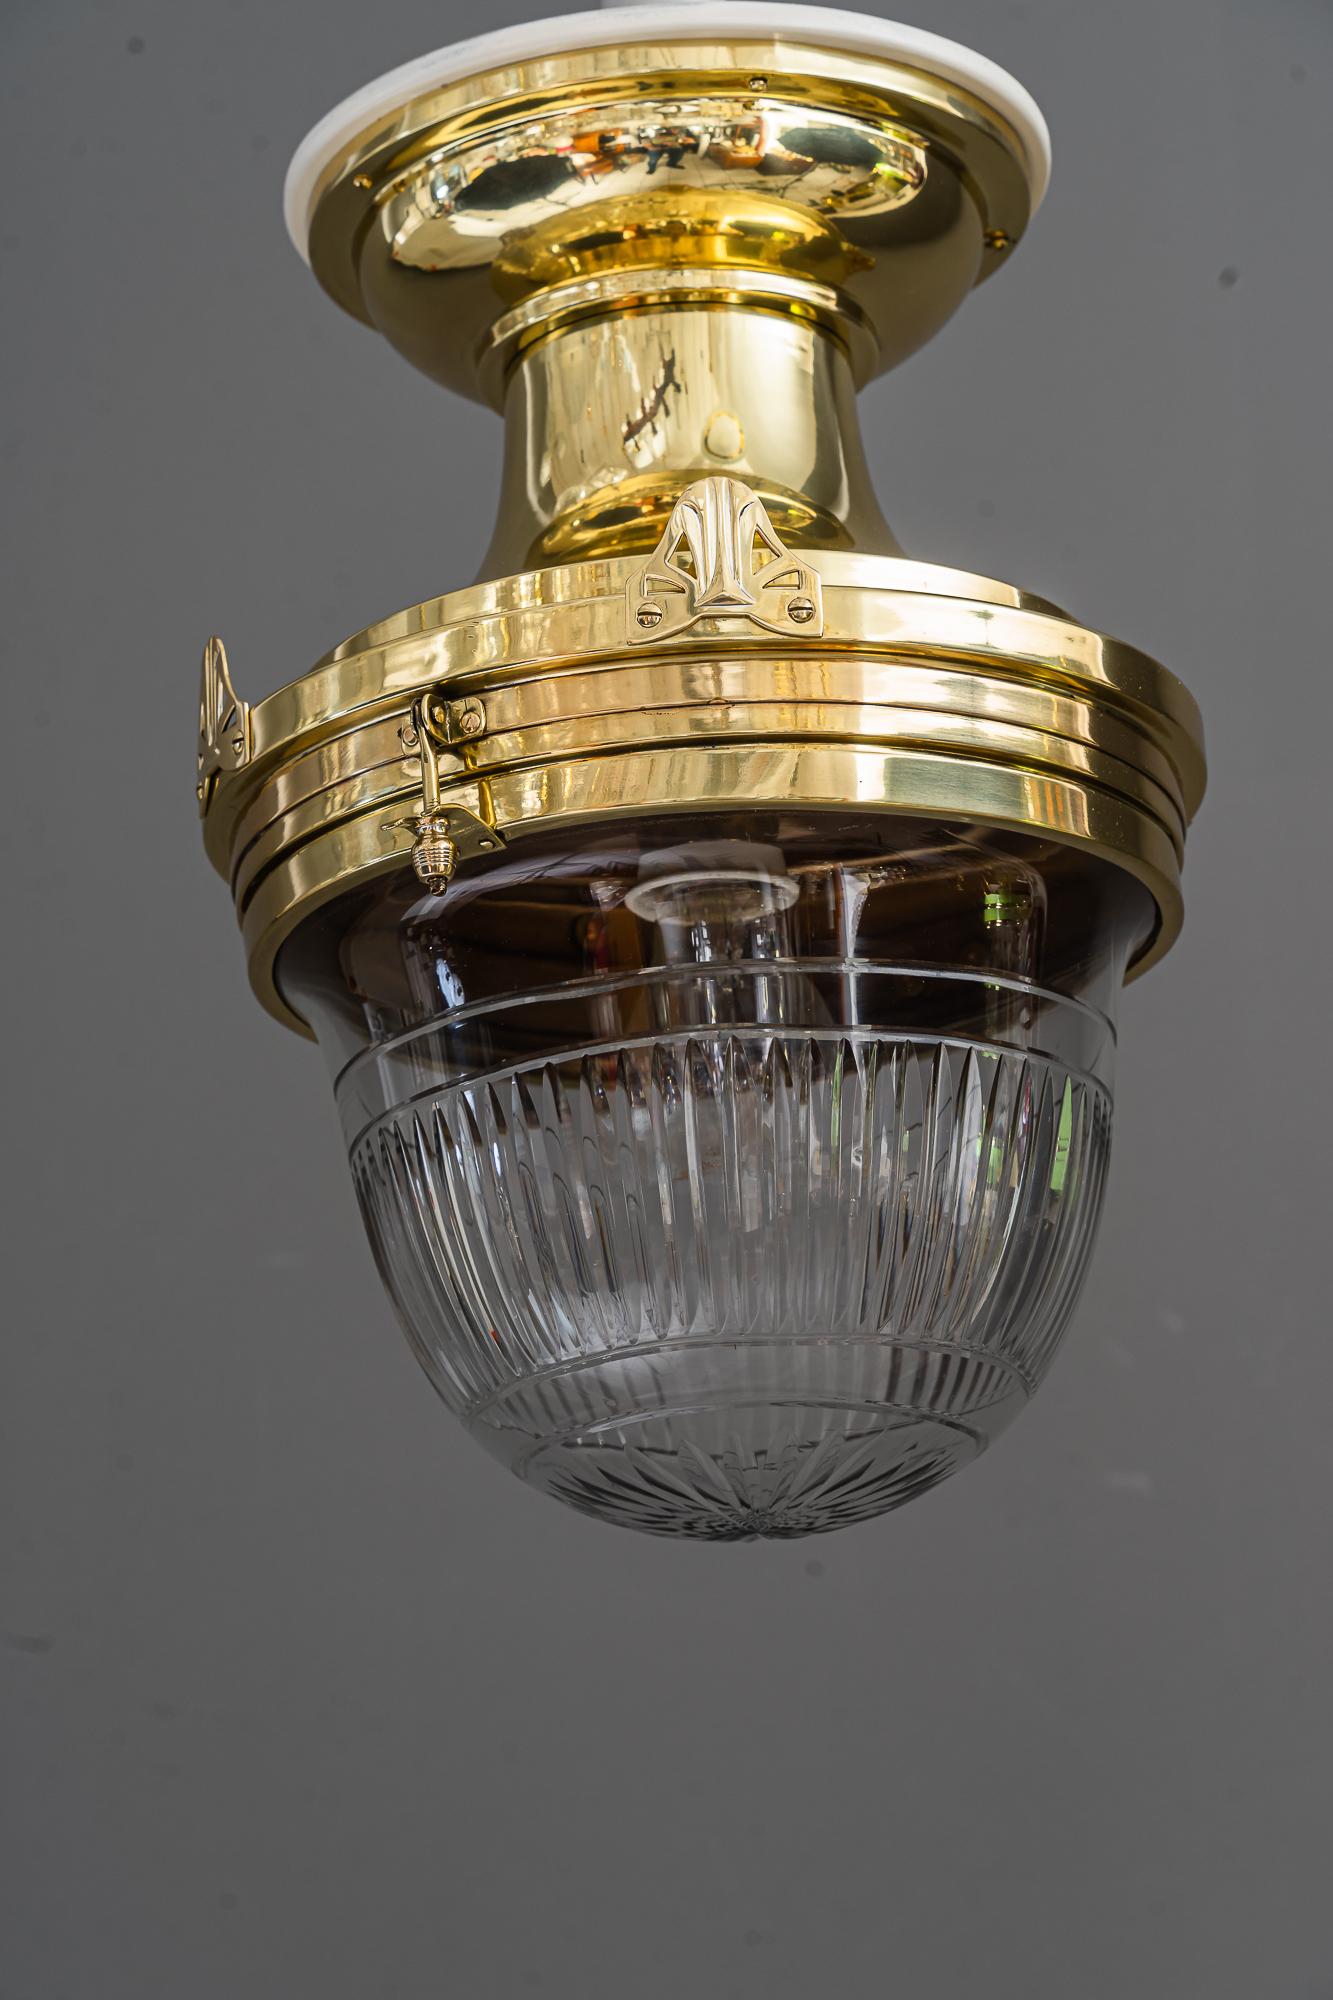 Big art deco ceiling lamp with cut glass vienna around 1920s
Polished and stove enamelled
Wood white paited on top.